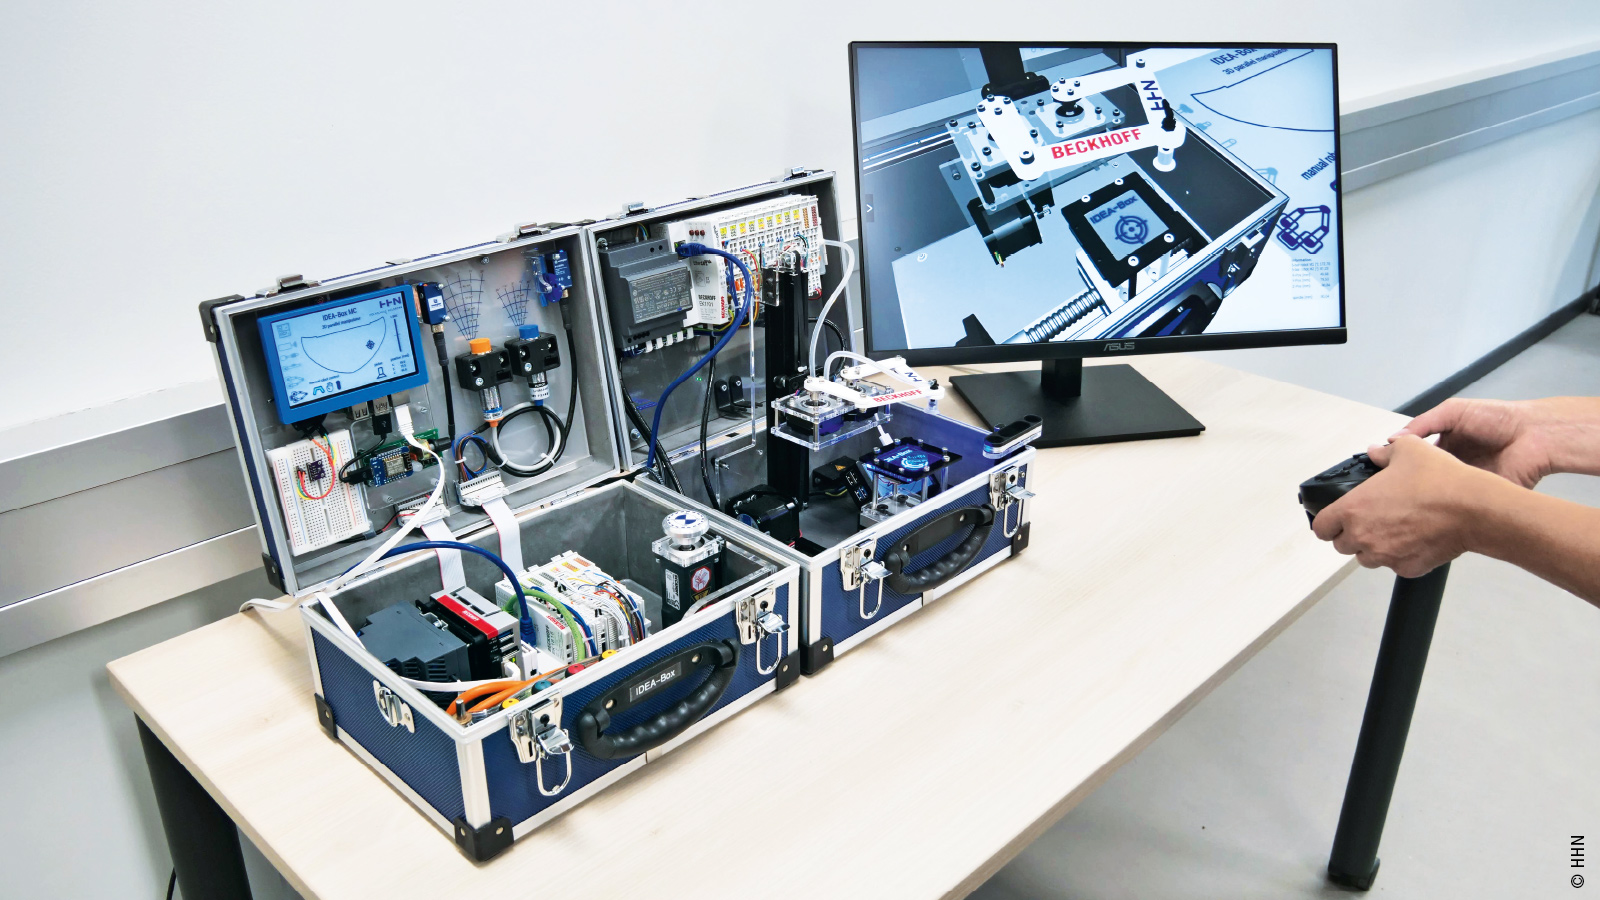 Small and compact cases: The IDEA basic box (left) with the C6015 ultra-compact Industrial PC and the expansion to include more extensive motion functions (right) – where operation via joystick and even hand tracking is possible. 